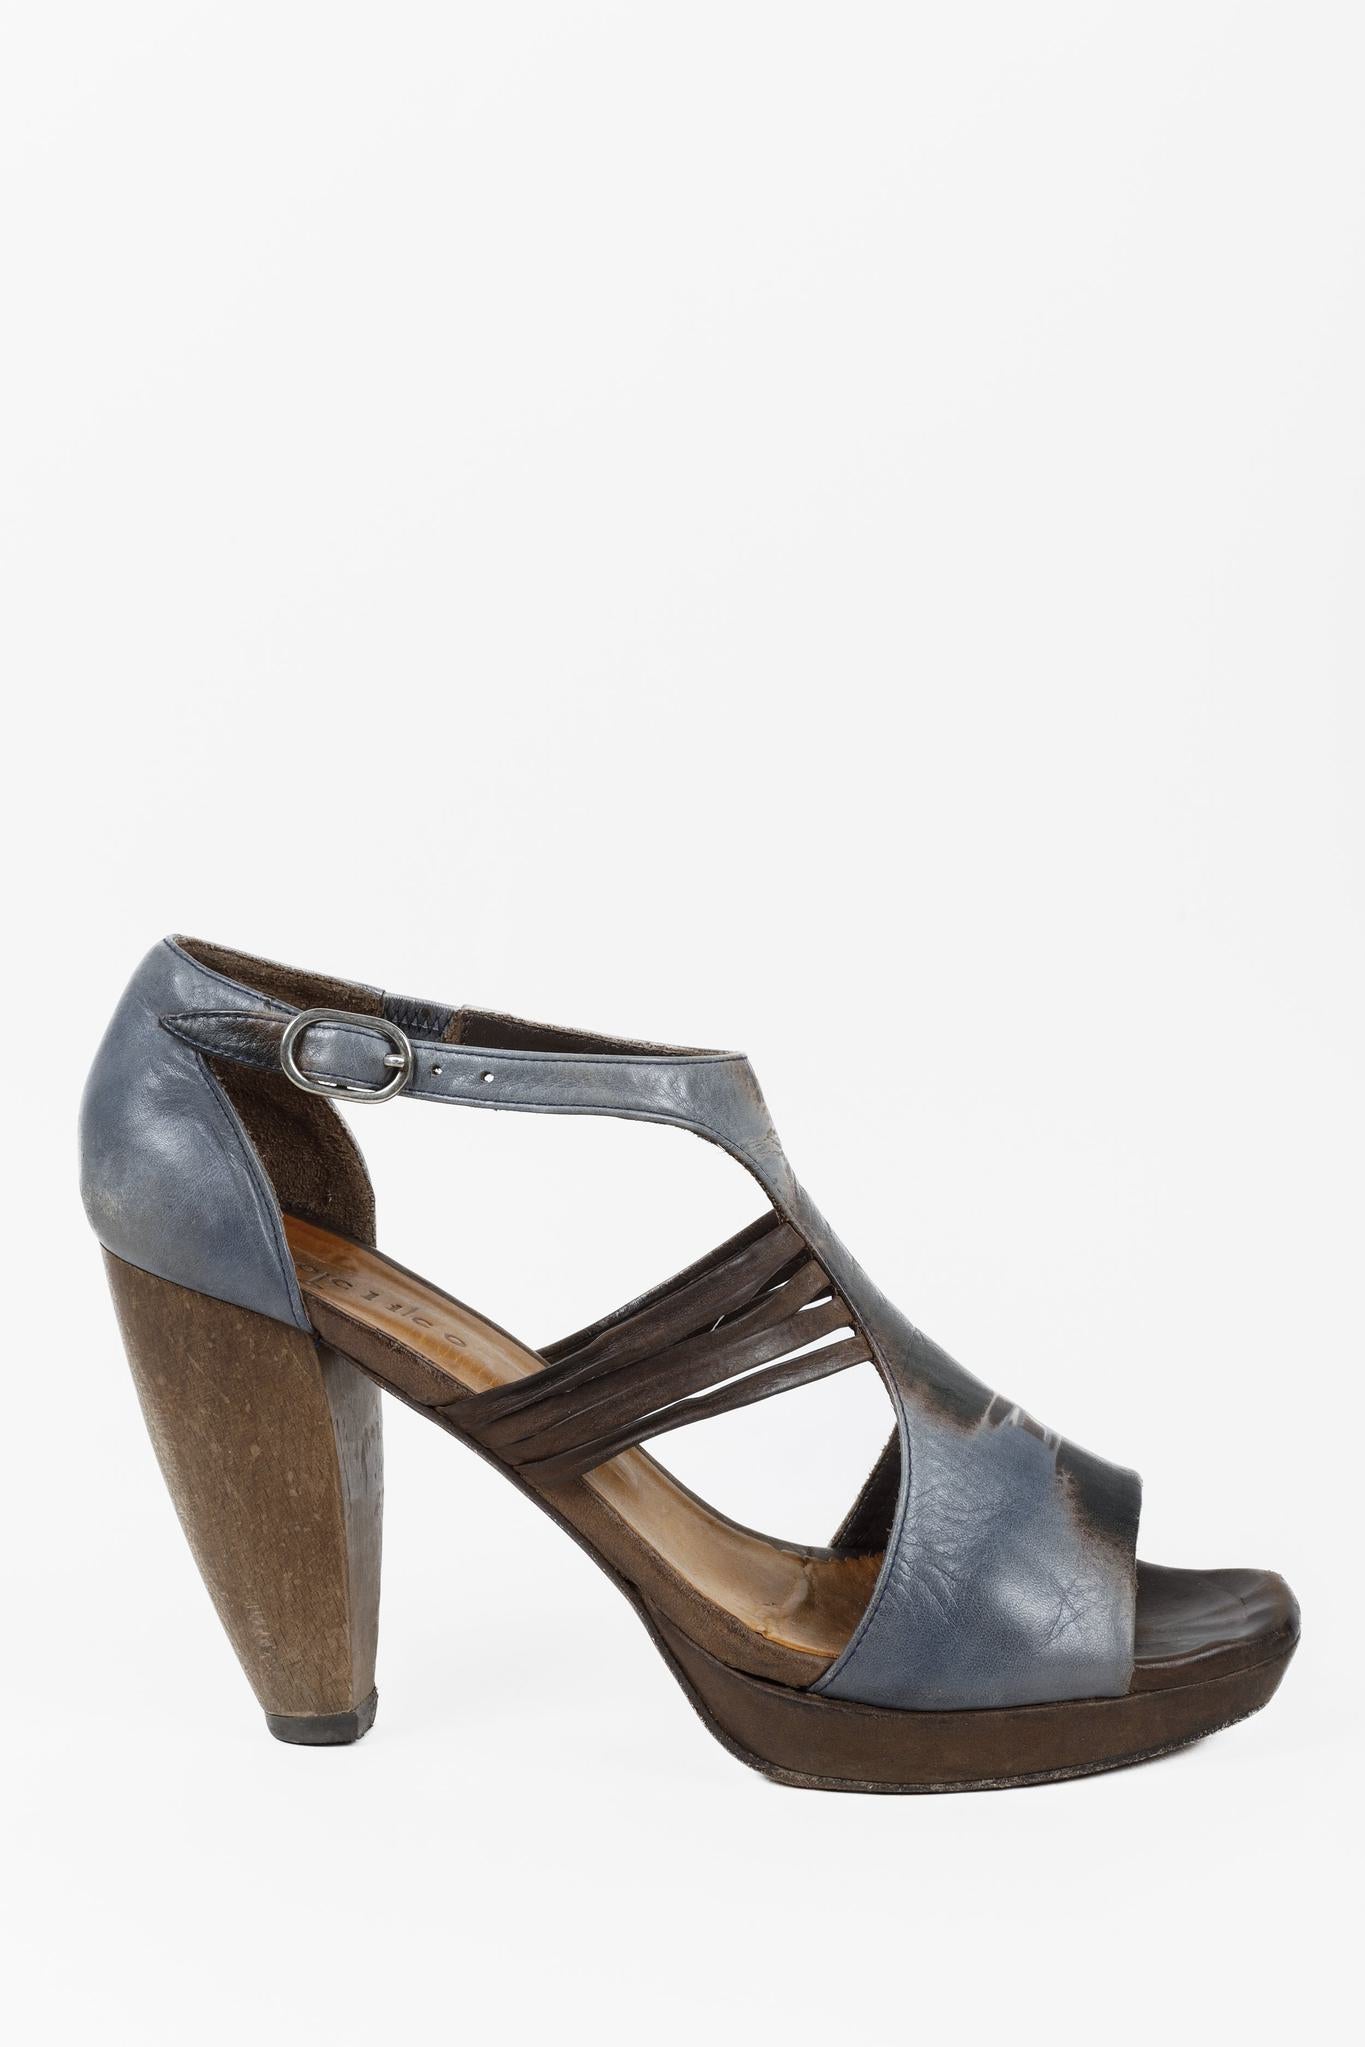 Coclico Abstract Blue Wood Heel Sandals